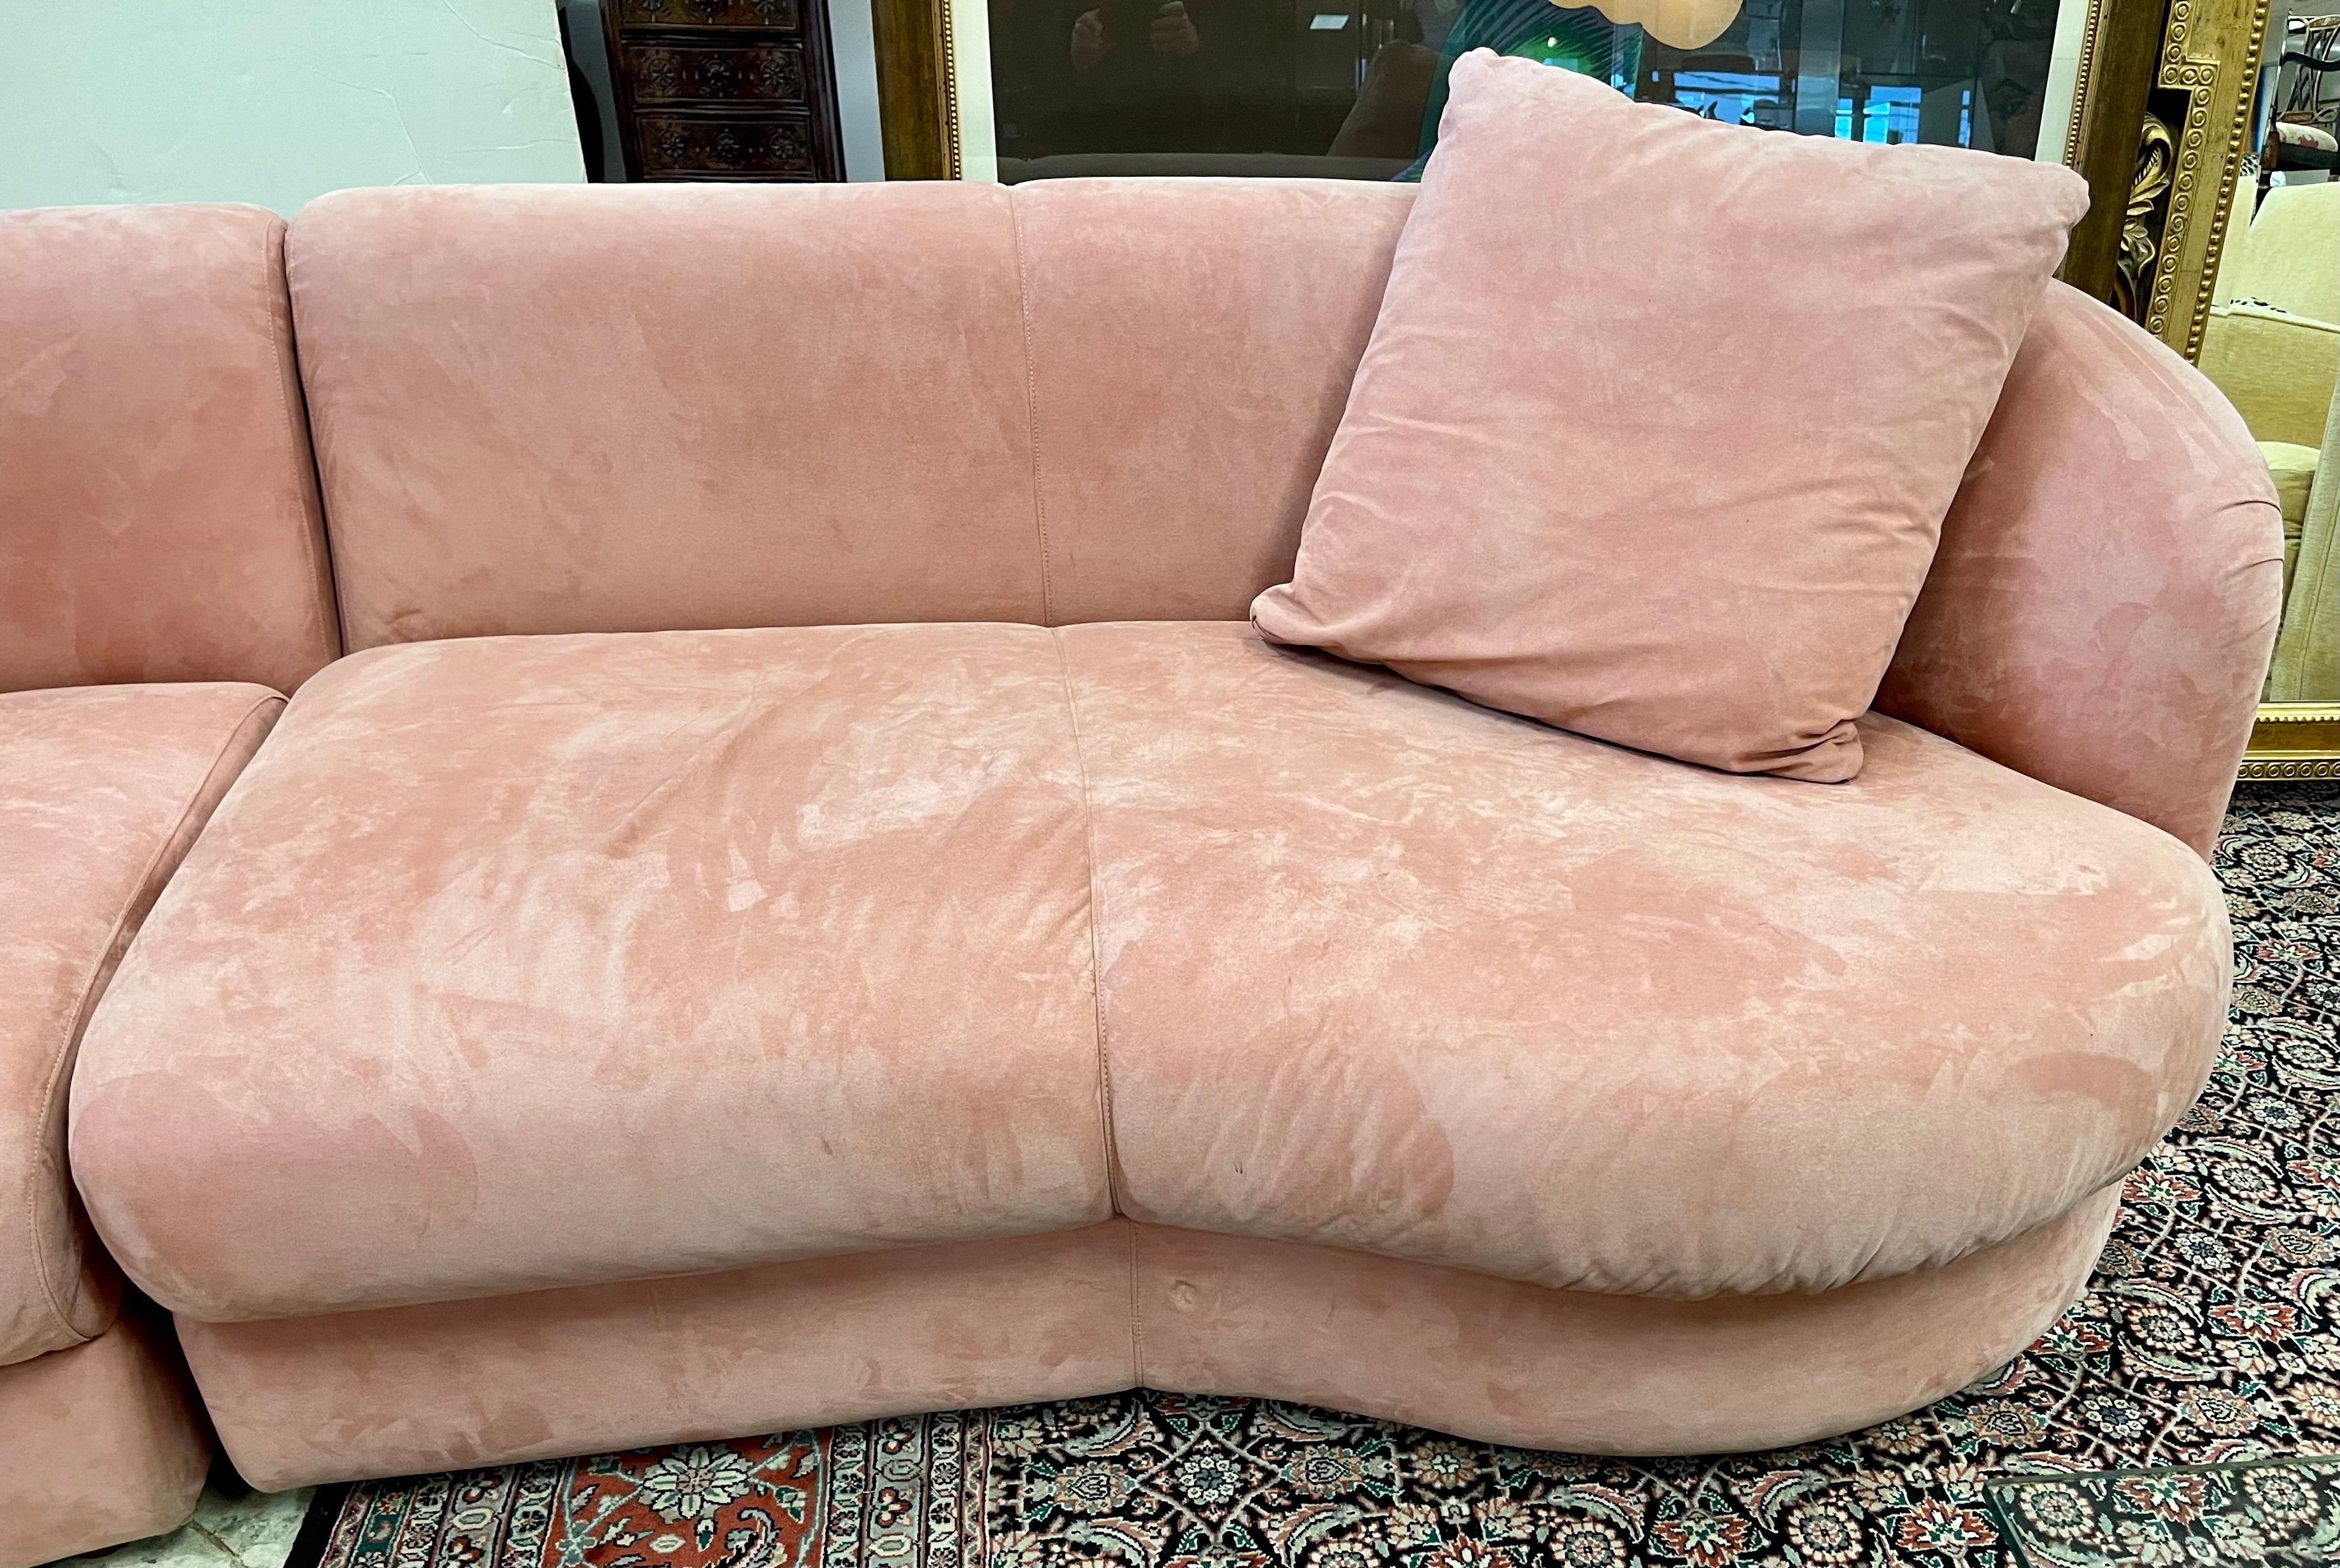 Wood Directional Mid-Century Biomorphic Rose Color Suede Leather Cloud Sofa Sectional